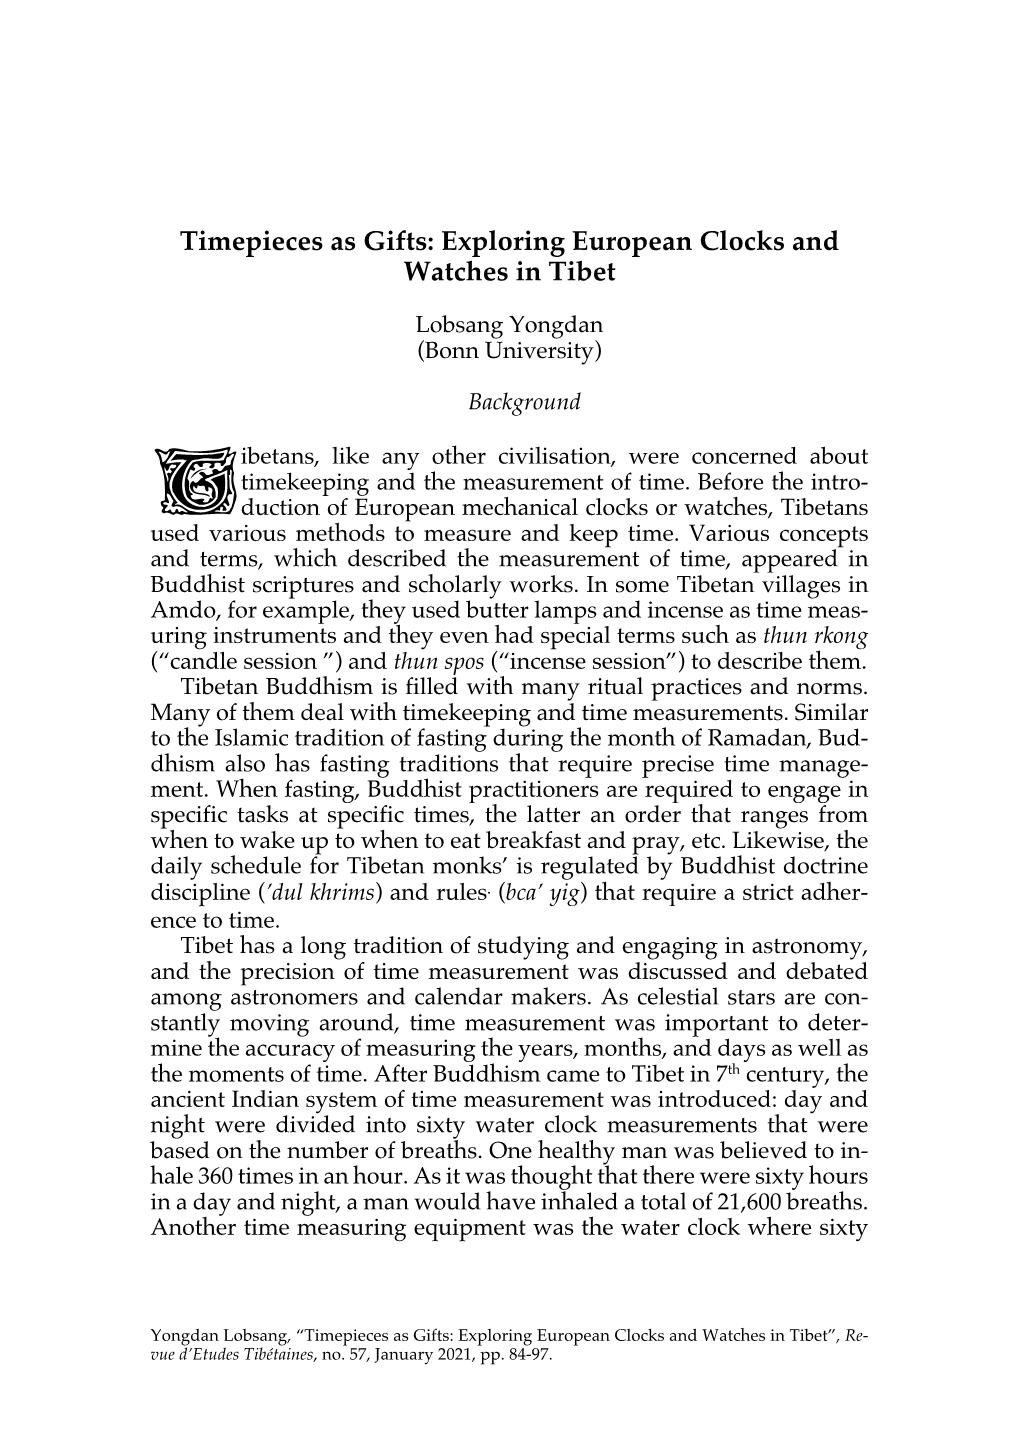 Timepieces As Gifts: Exploring European Clocks and Watches in Tibet